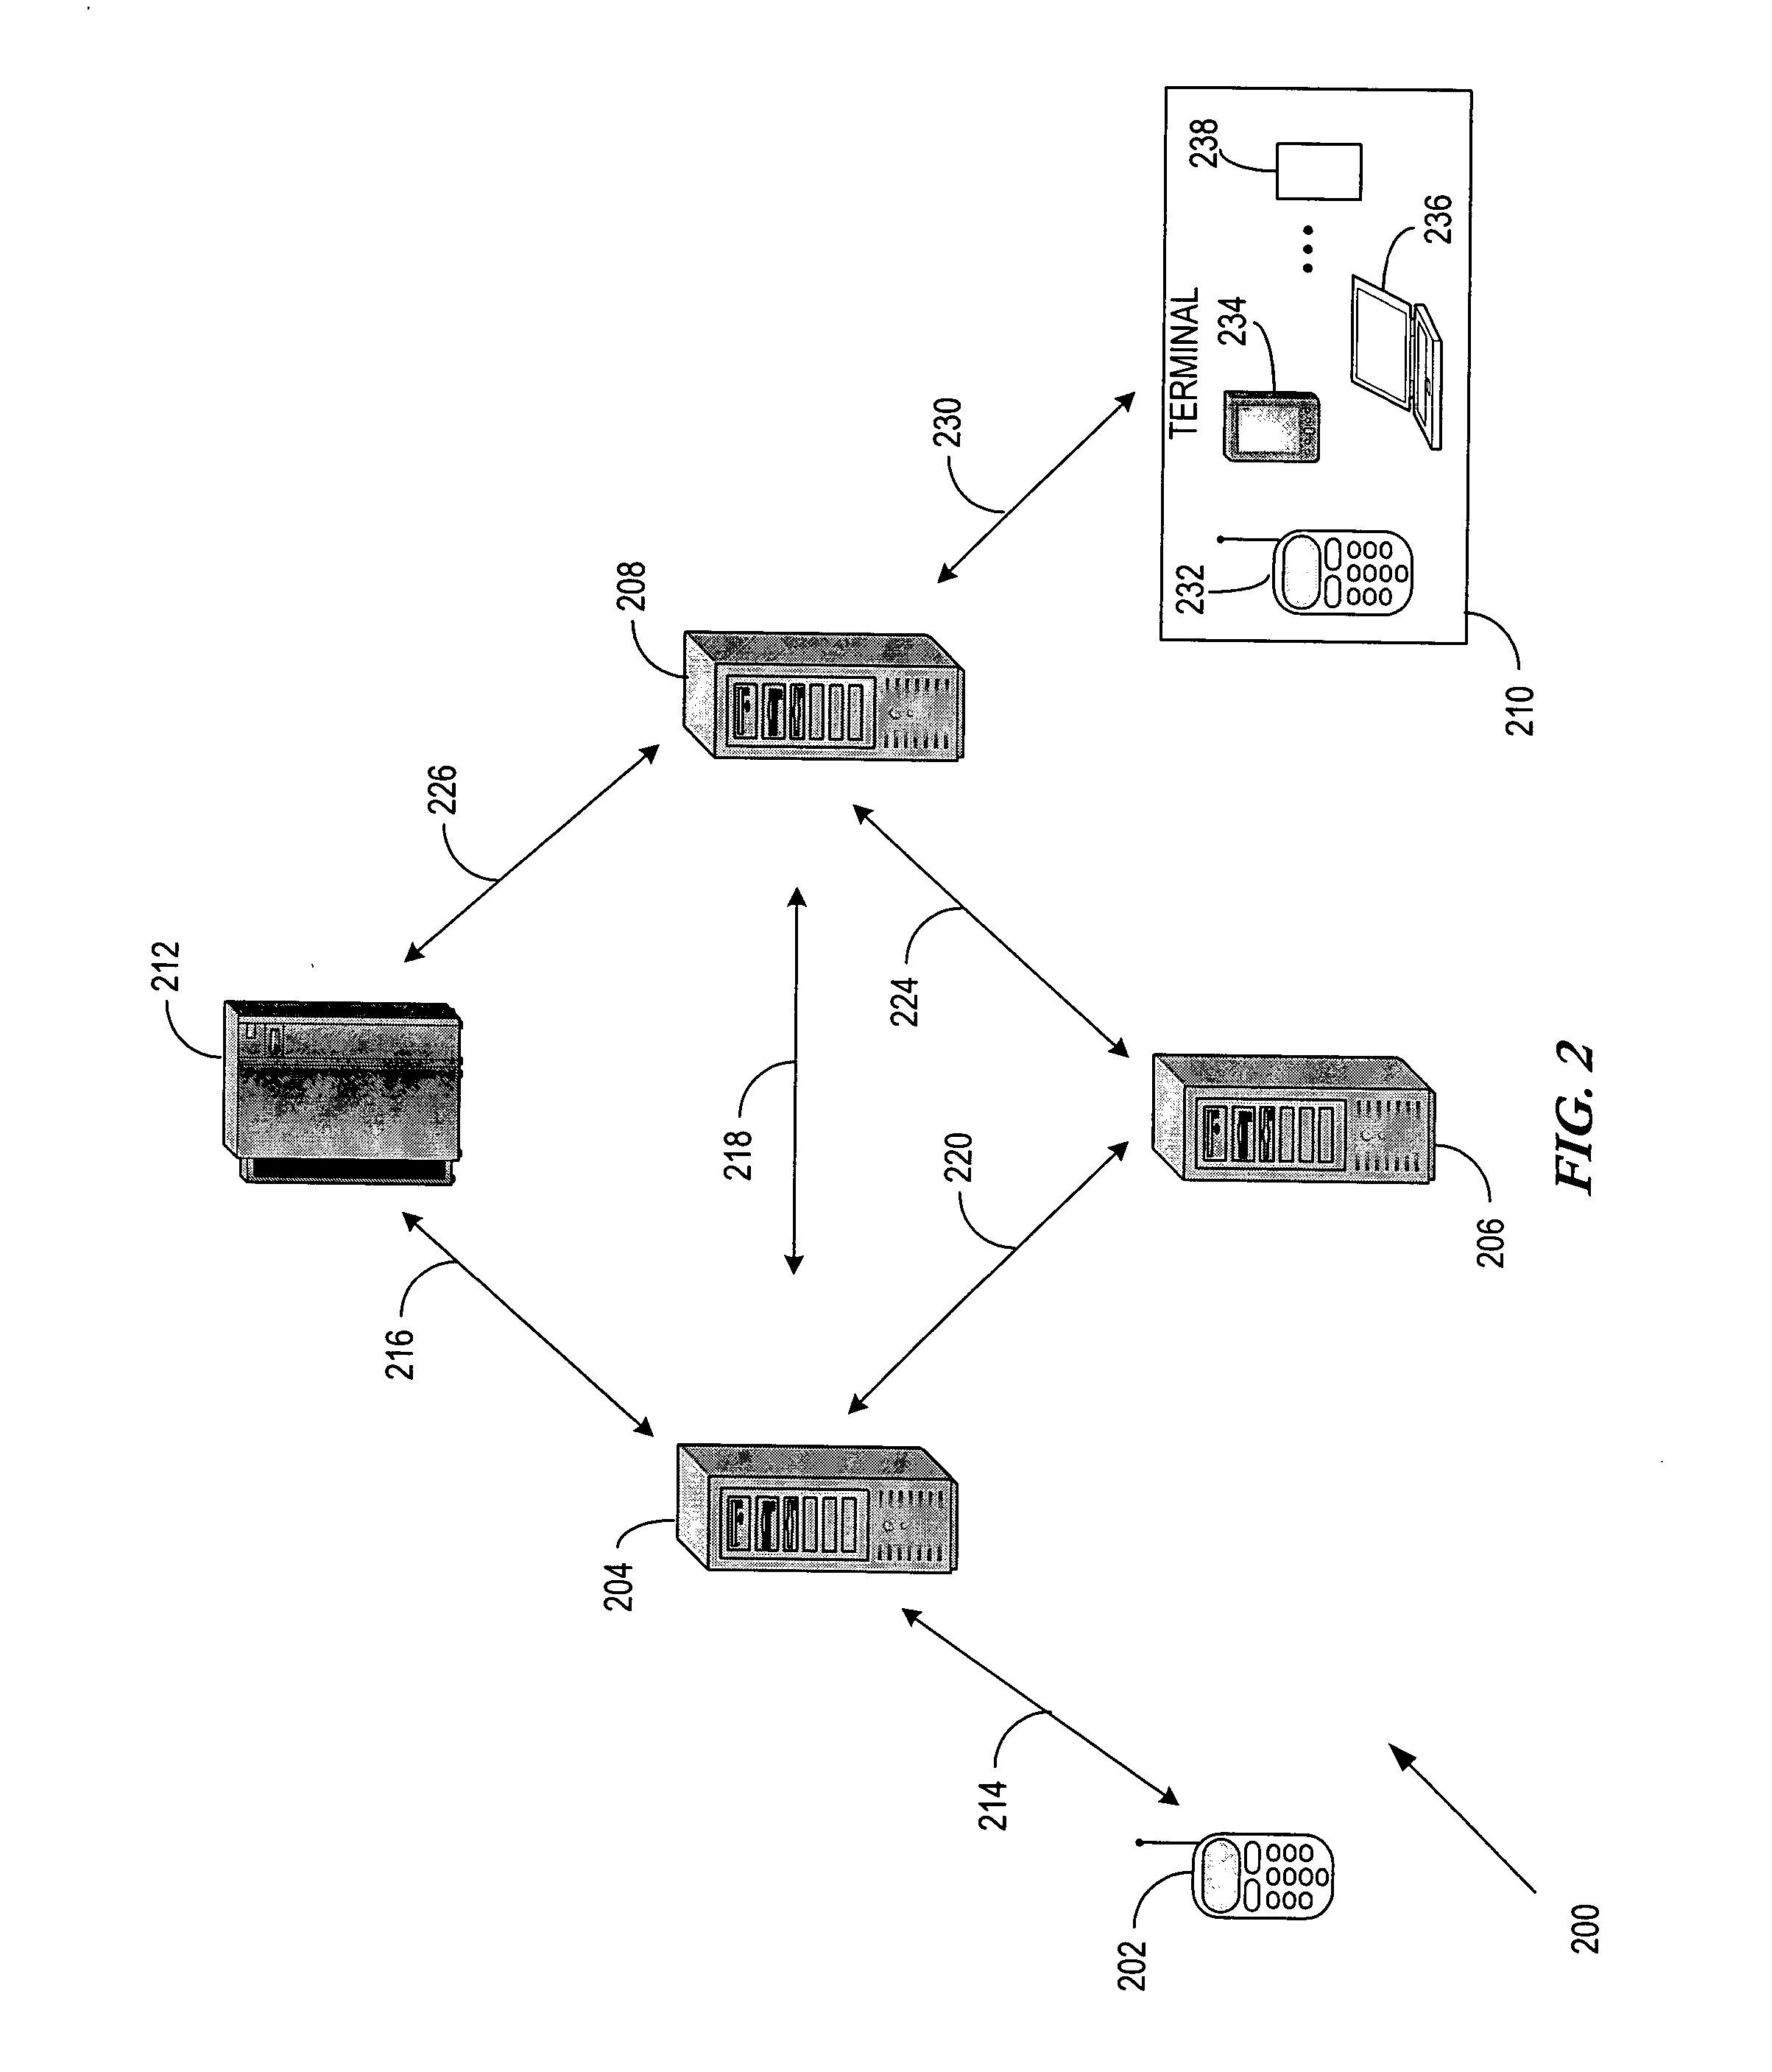 System and method for adaptation of peer-to-peer multimedia sessions